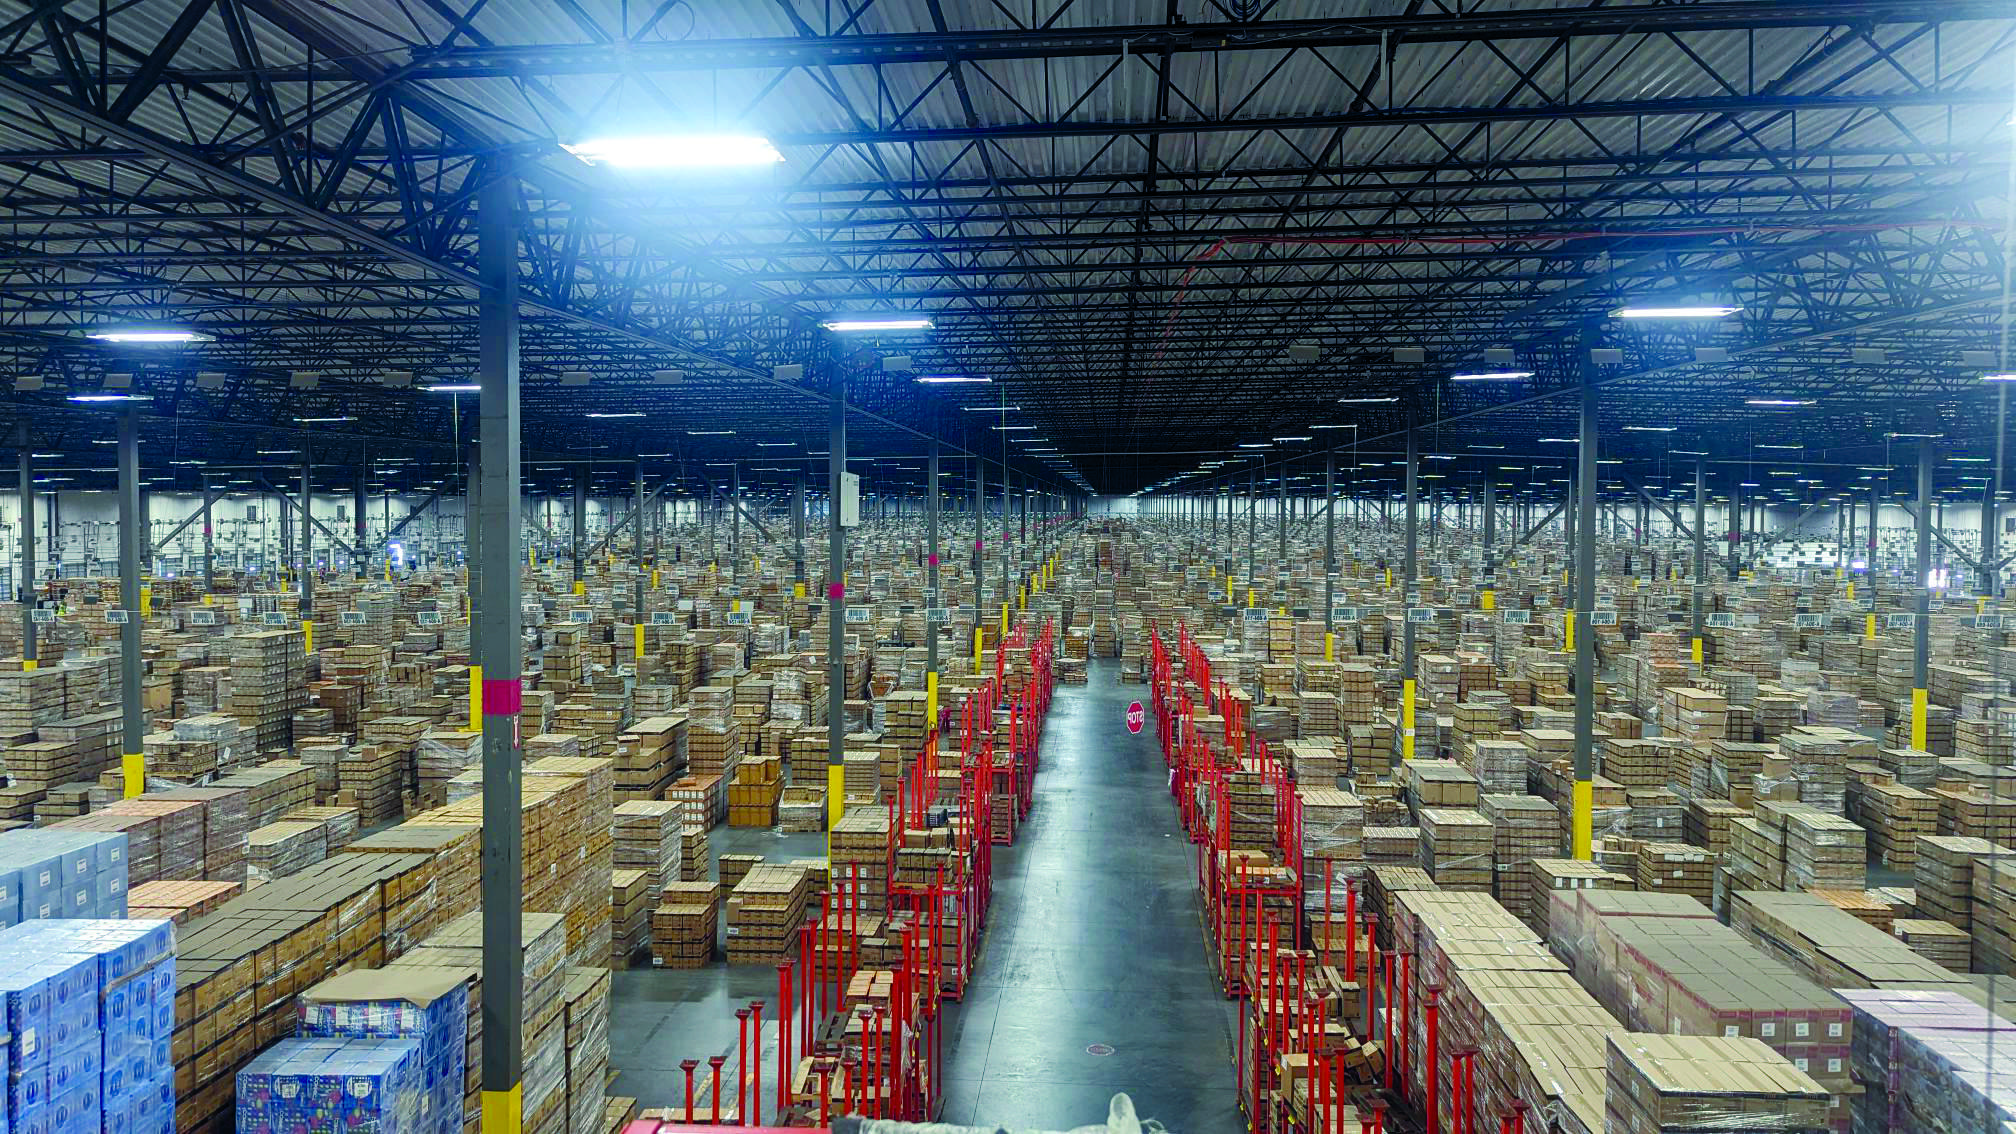 Pallets of brown boxes sit stacked in an expansive high ceiling warehouse.